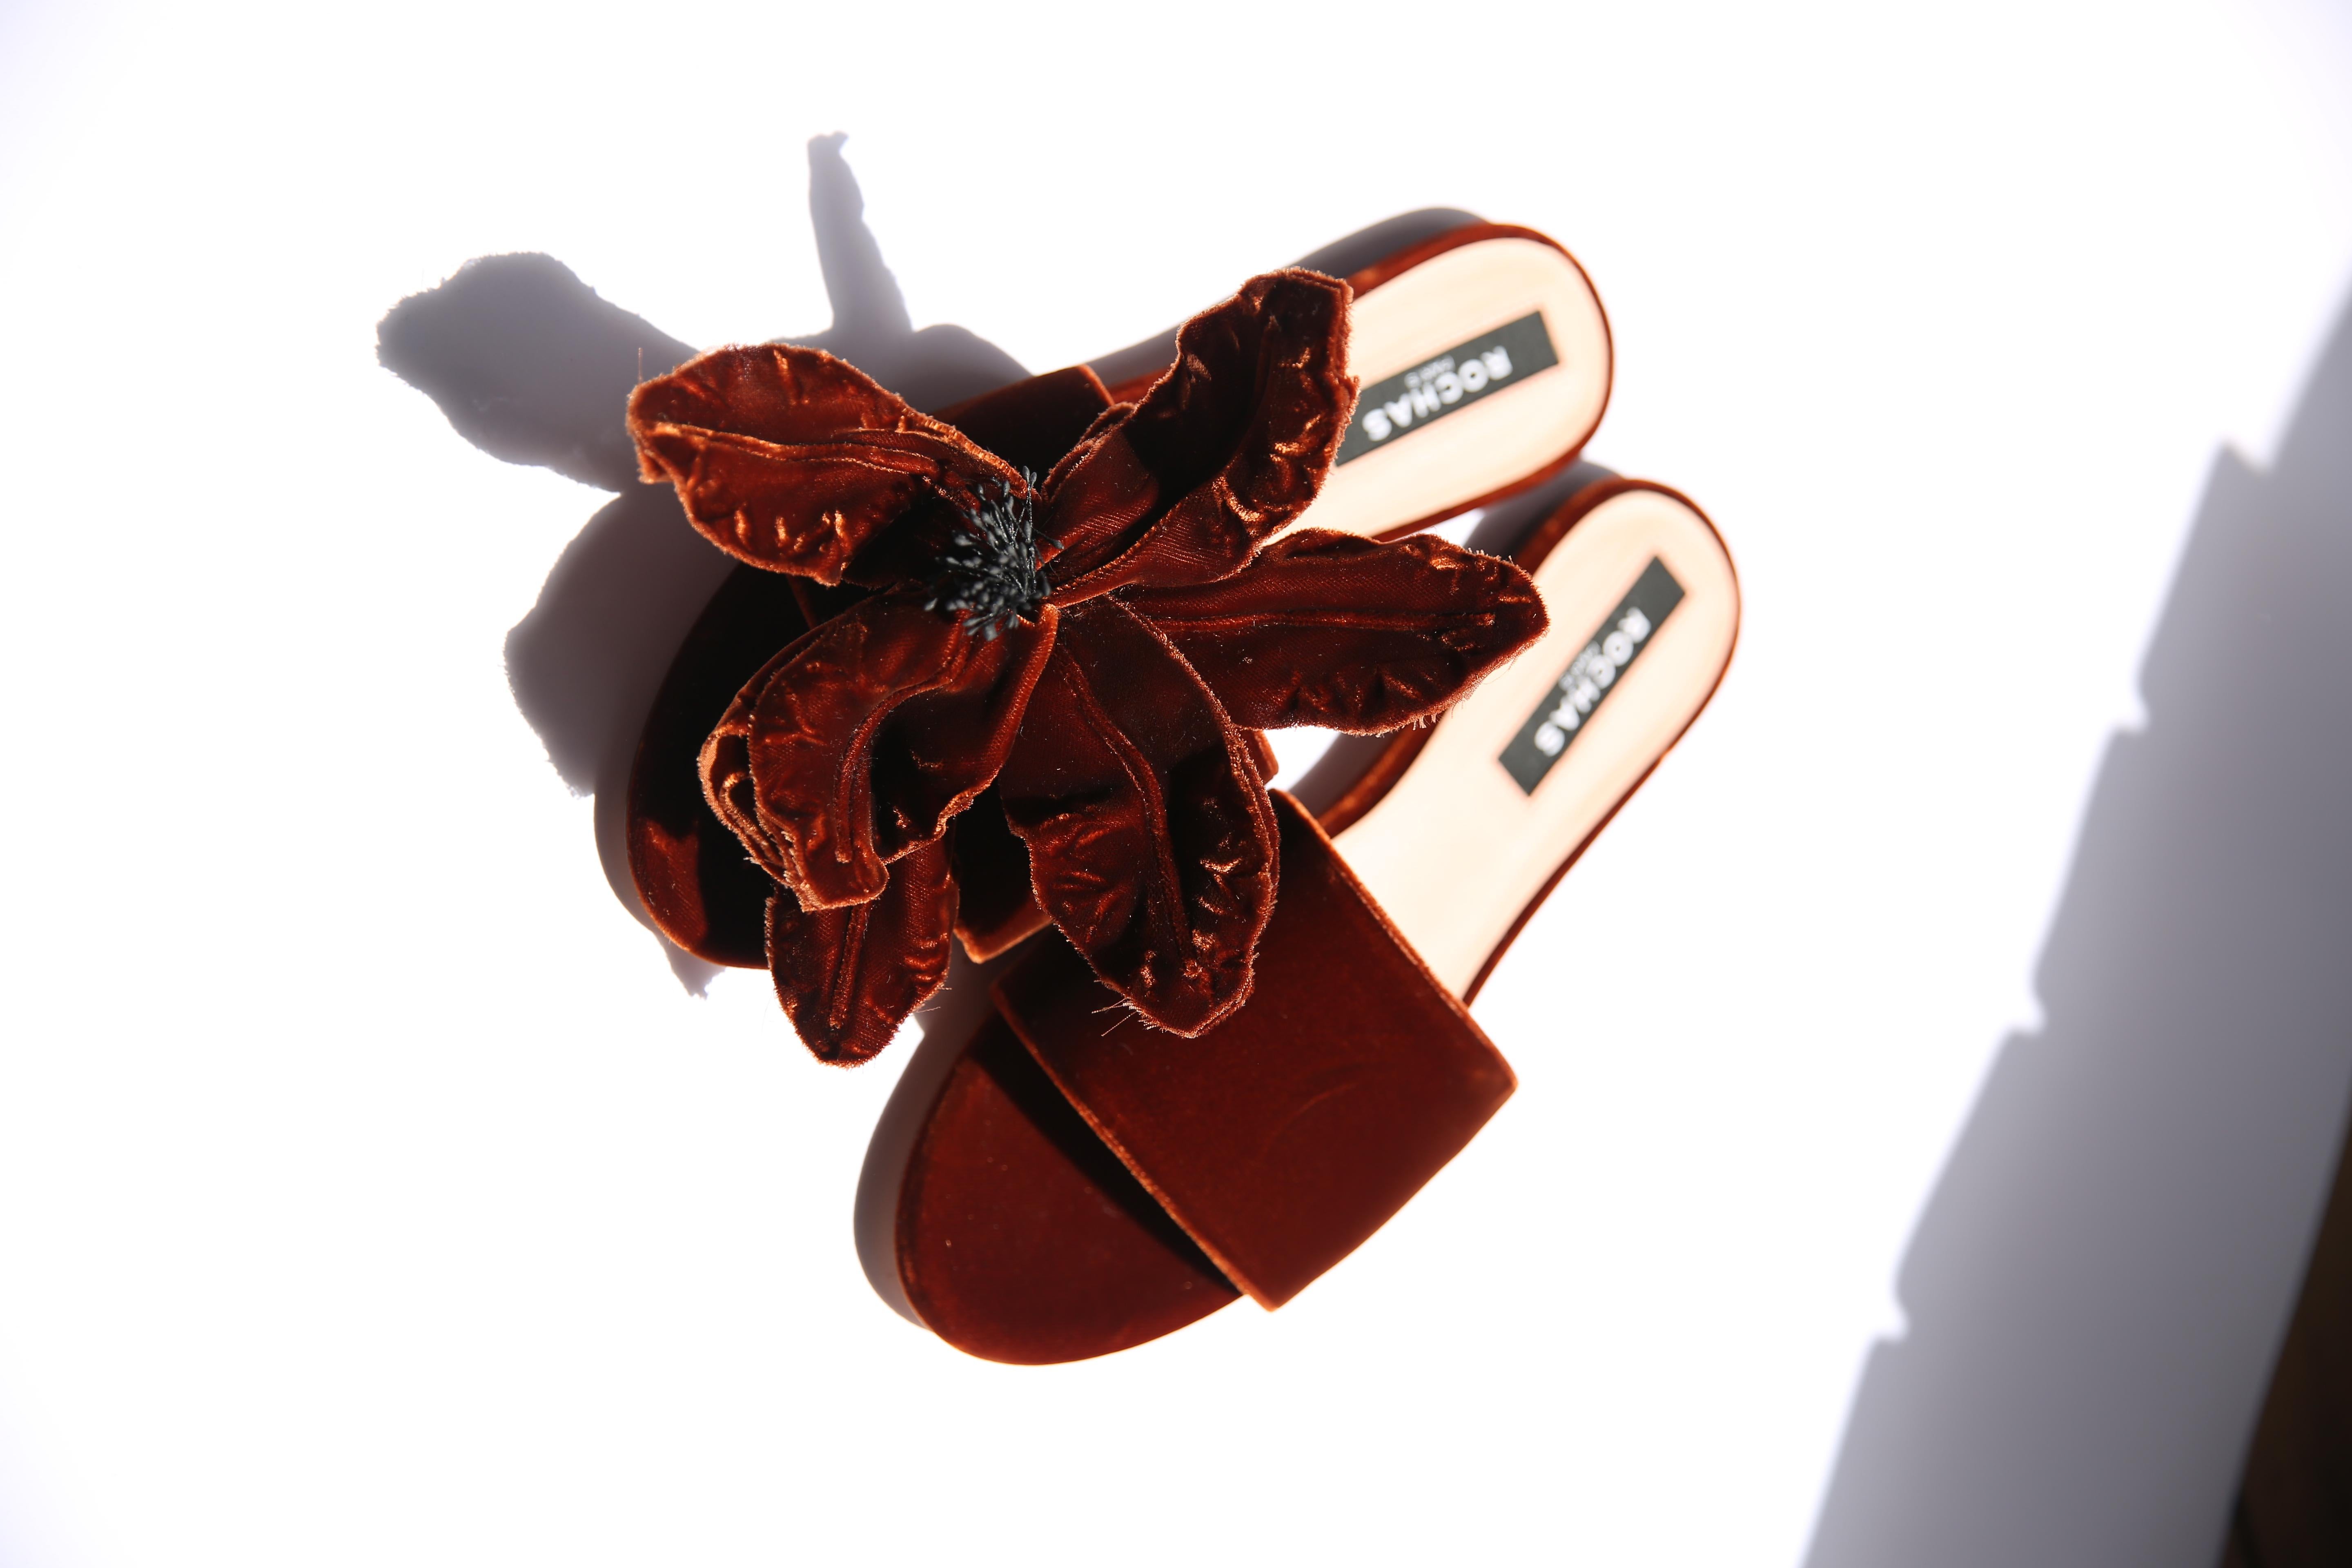 Rochas velvet slides with a large oversized floral appliqué 
Colour is a dark burnt orange/sepia
Made in Italy
These are brand new though the left shoe seems to have a slight indent to the velvet (Please refer to the photographs)
Come without their